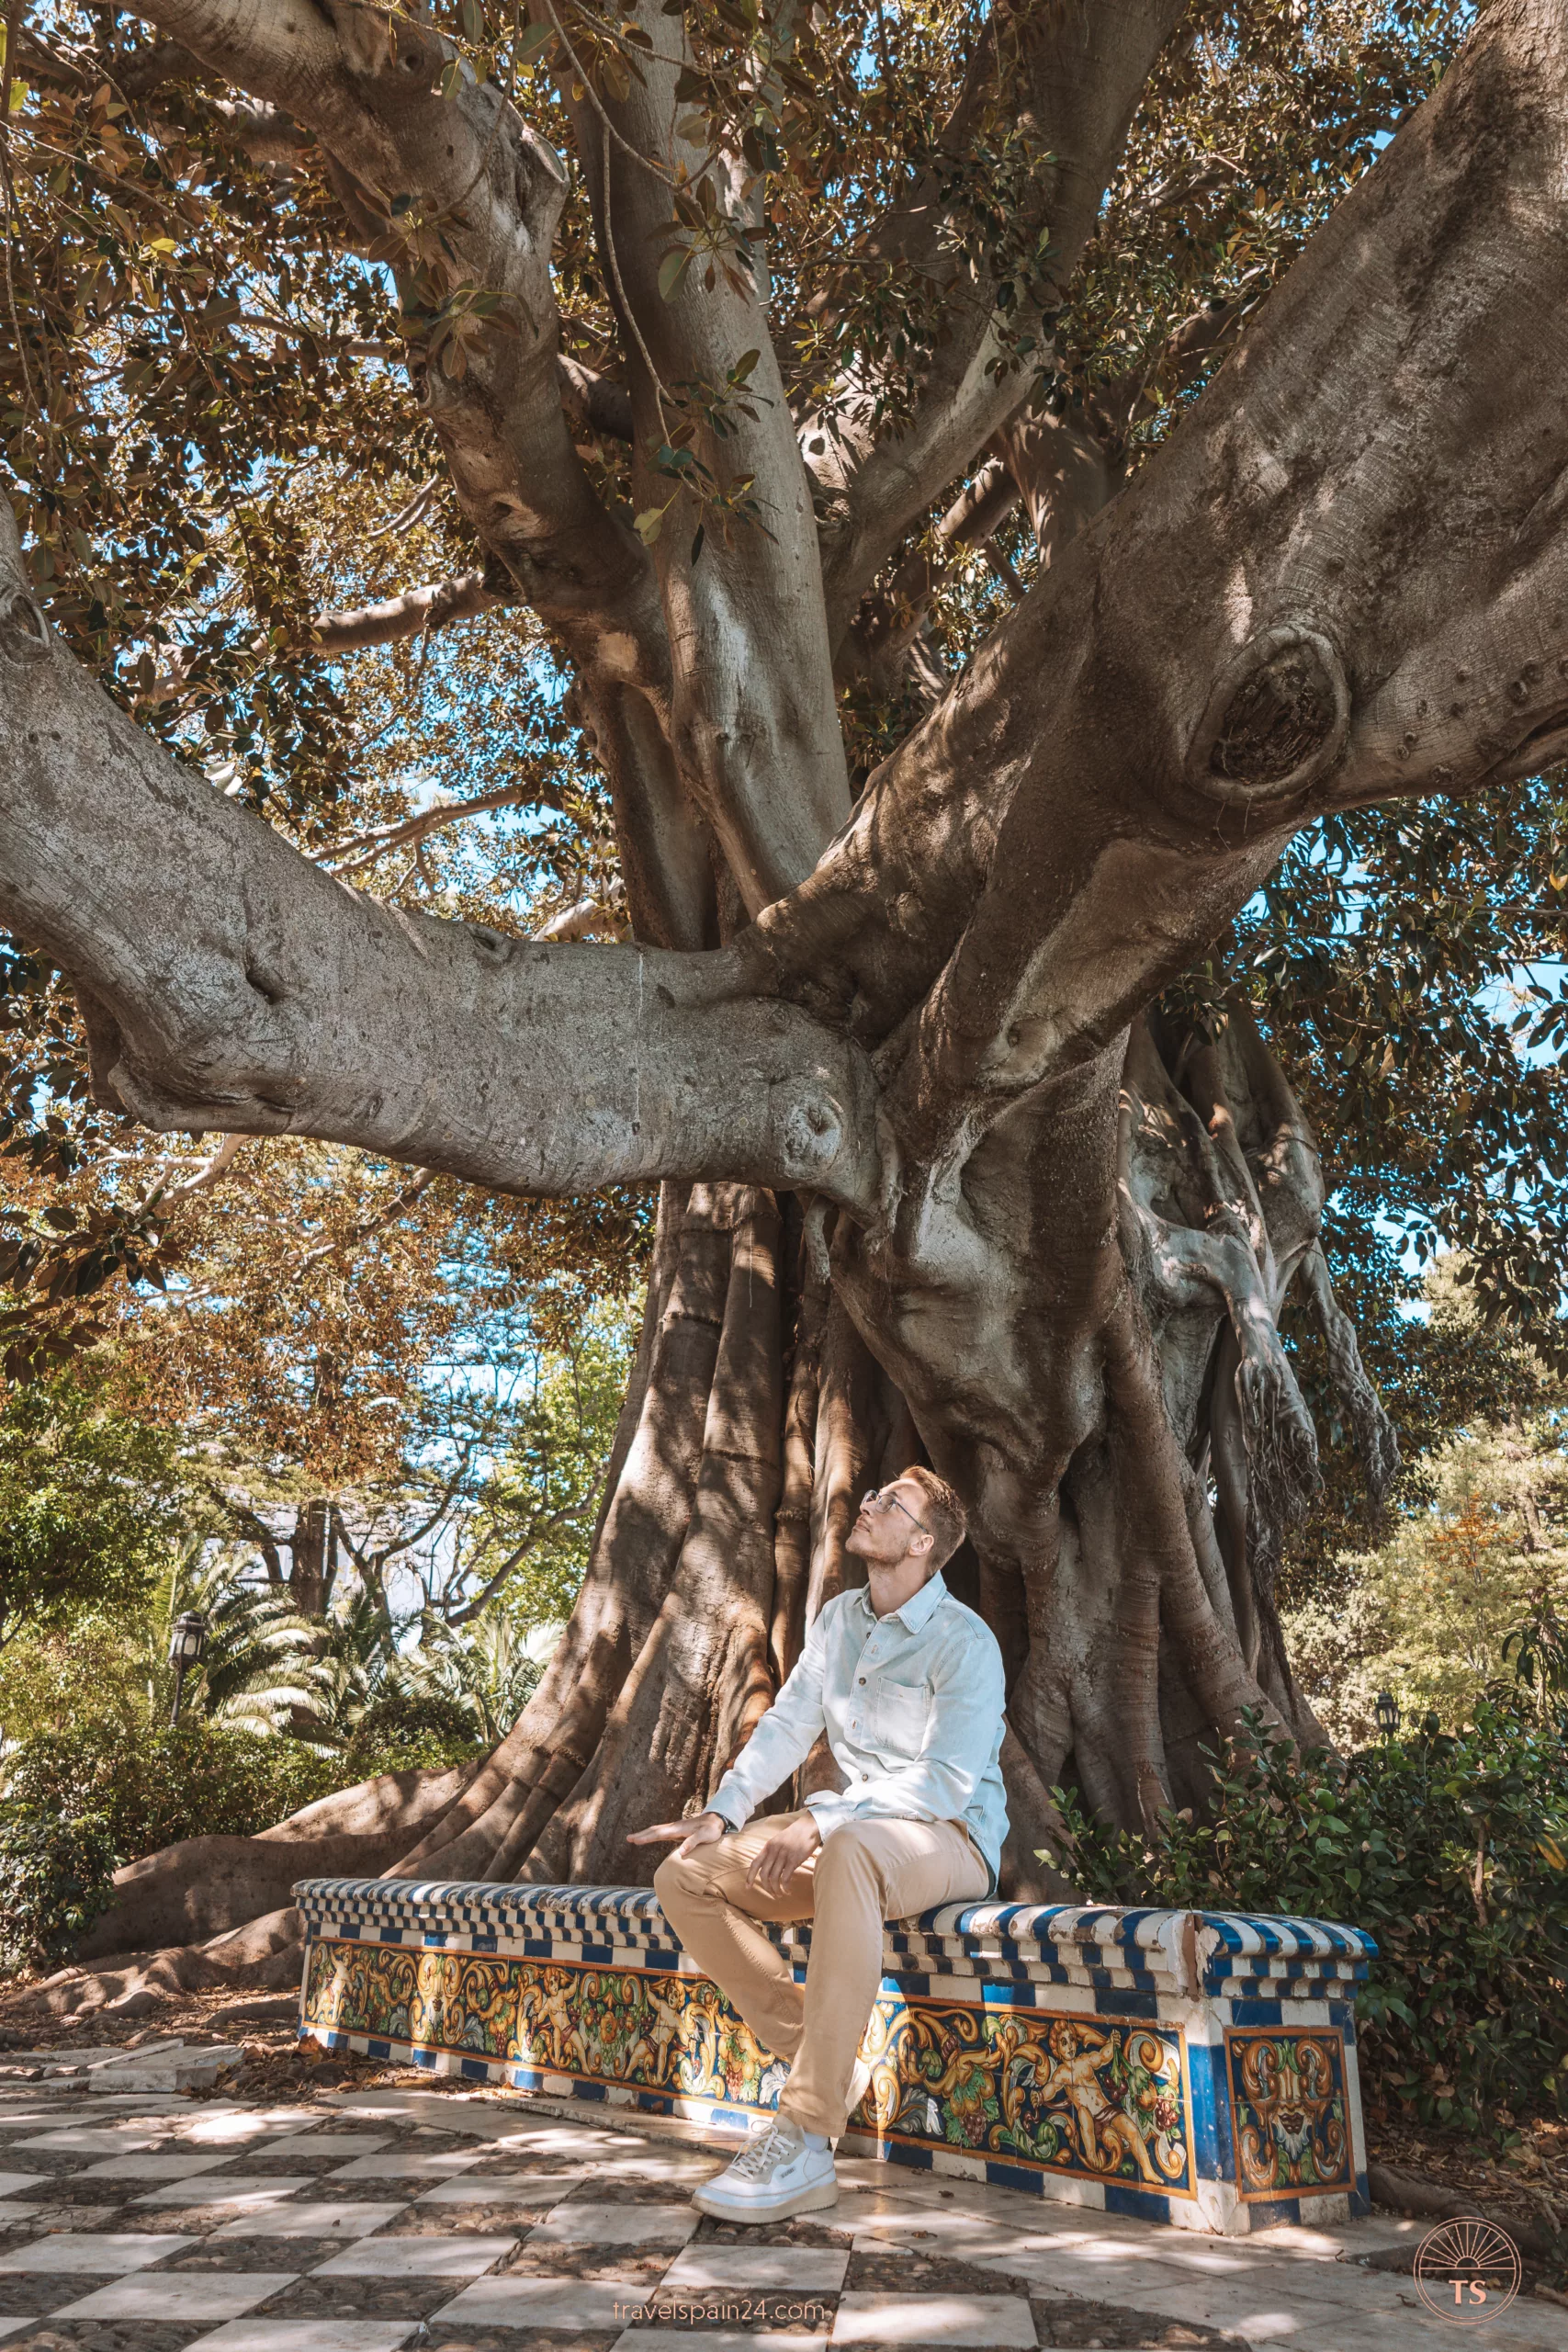 Timon van Basten seated on a bench under a centenary tree in Cadiz, enjoying the shade. This peaceful scene is one of the Cadiz highlights, capturing the city's natural beauty and serene atmosphere.
